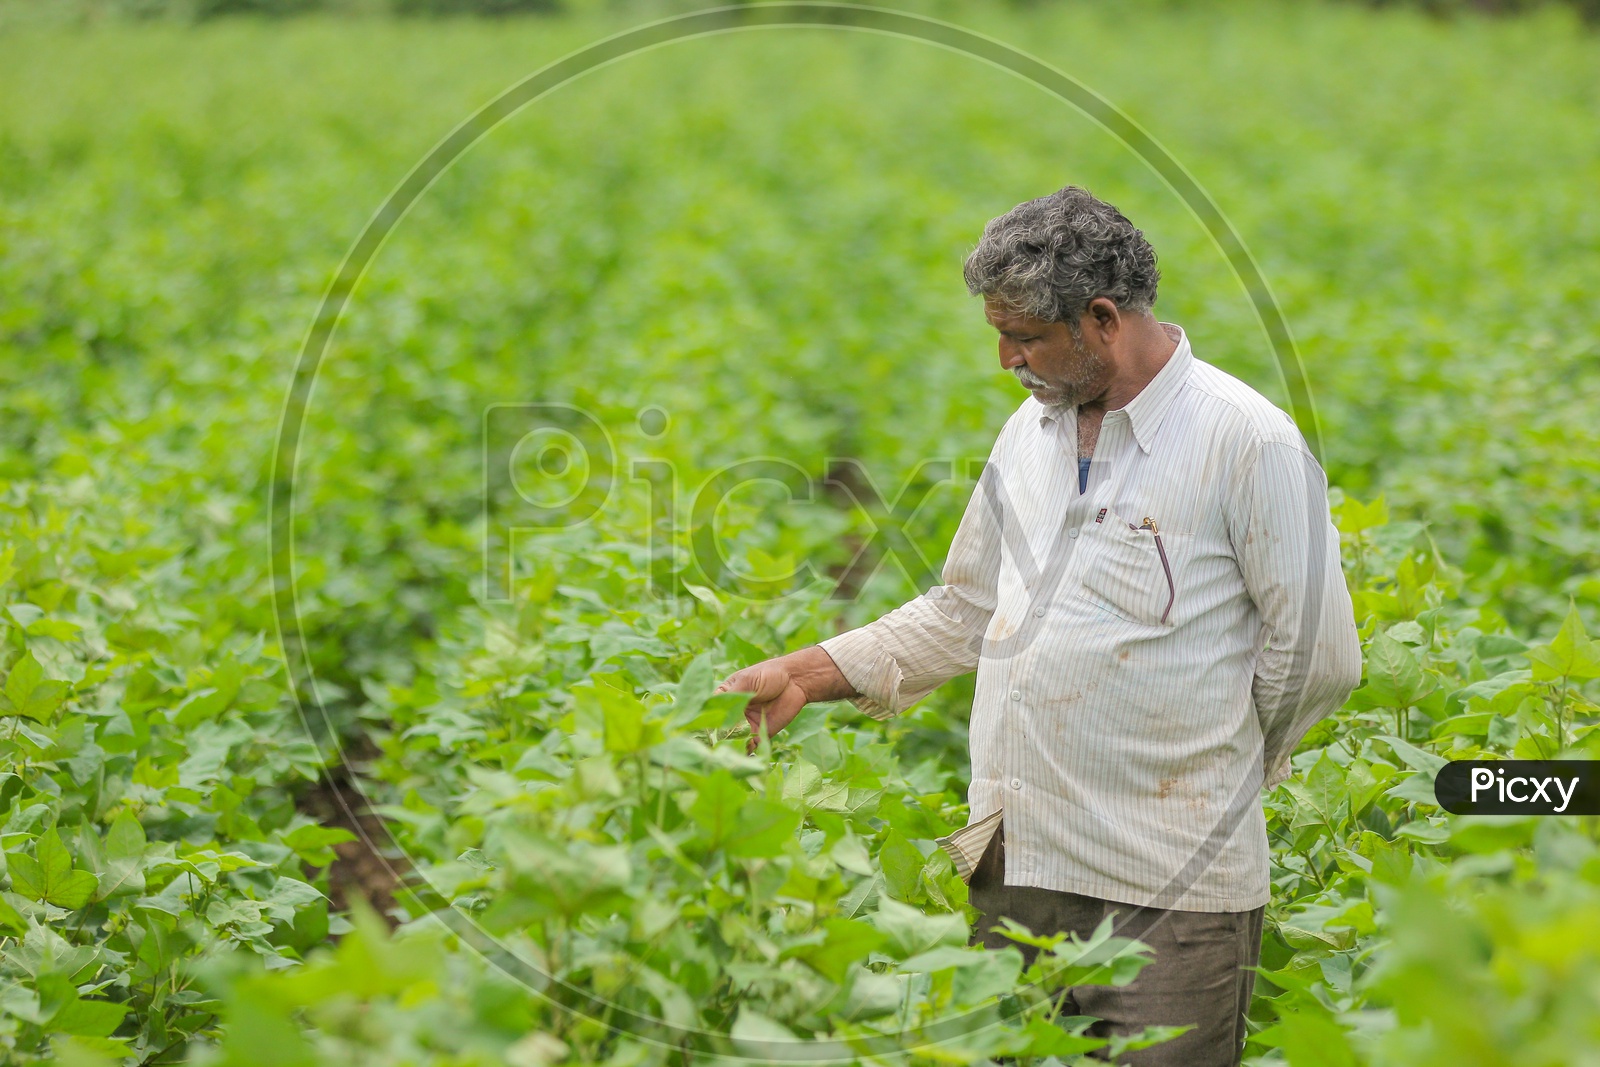 An Indian Farmer in Cotton Field Inspecting the Crop